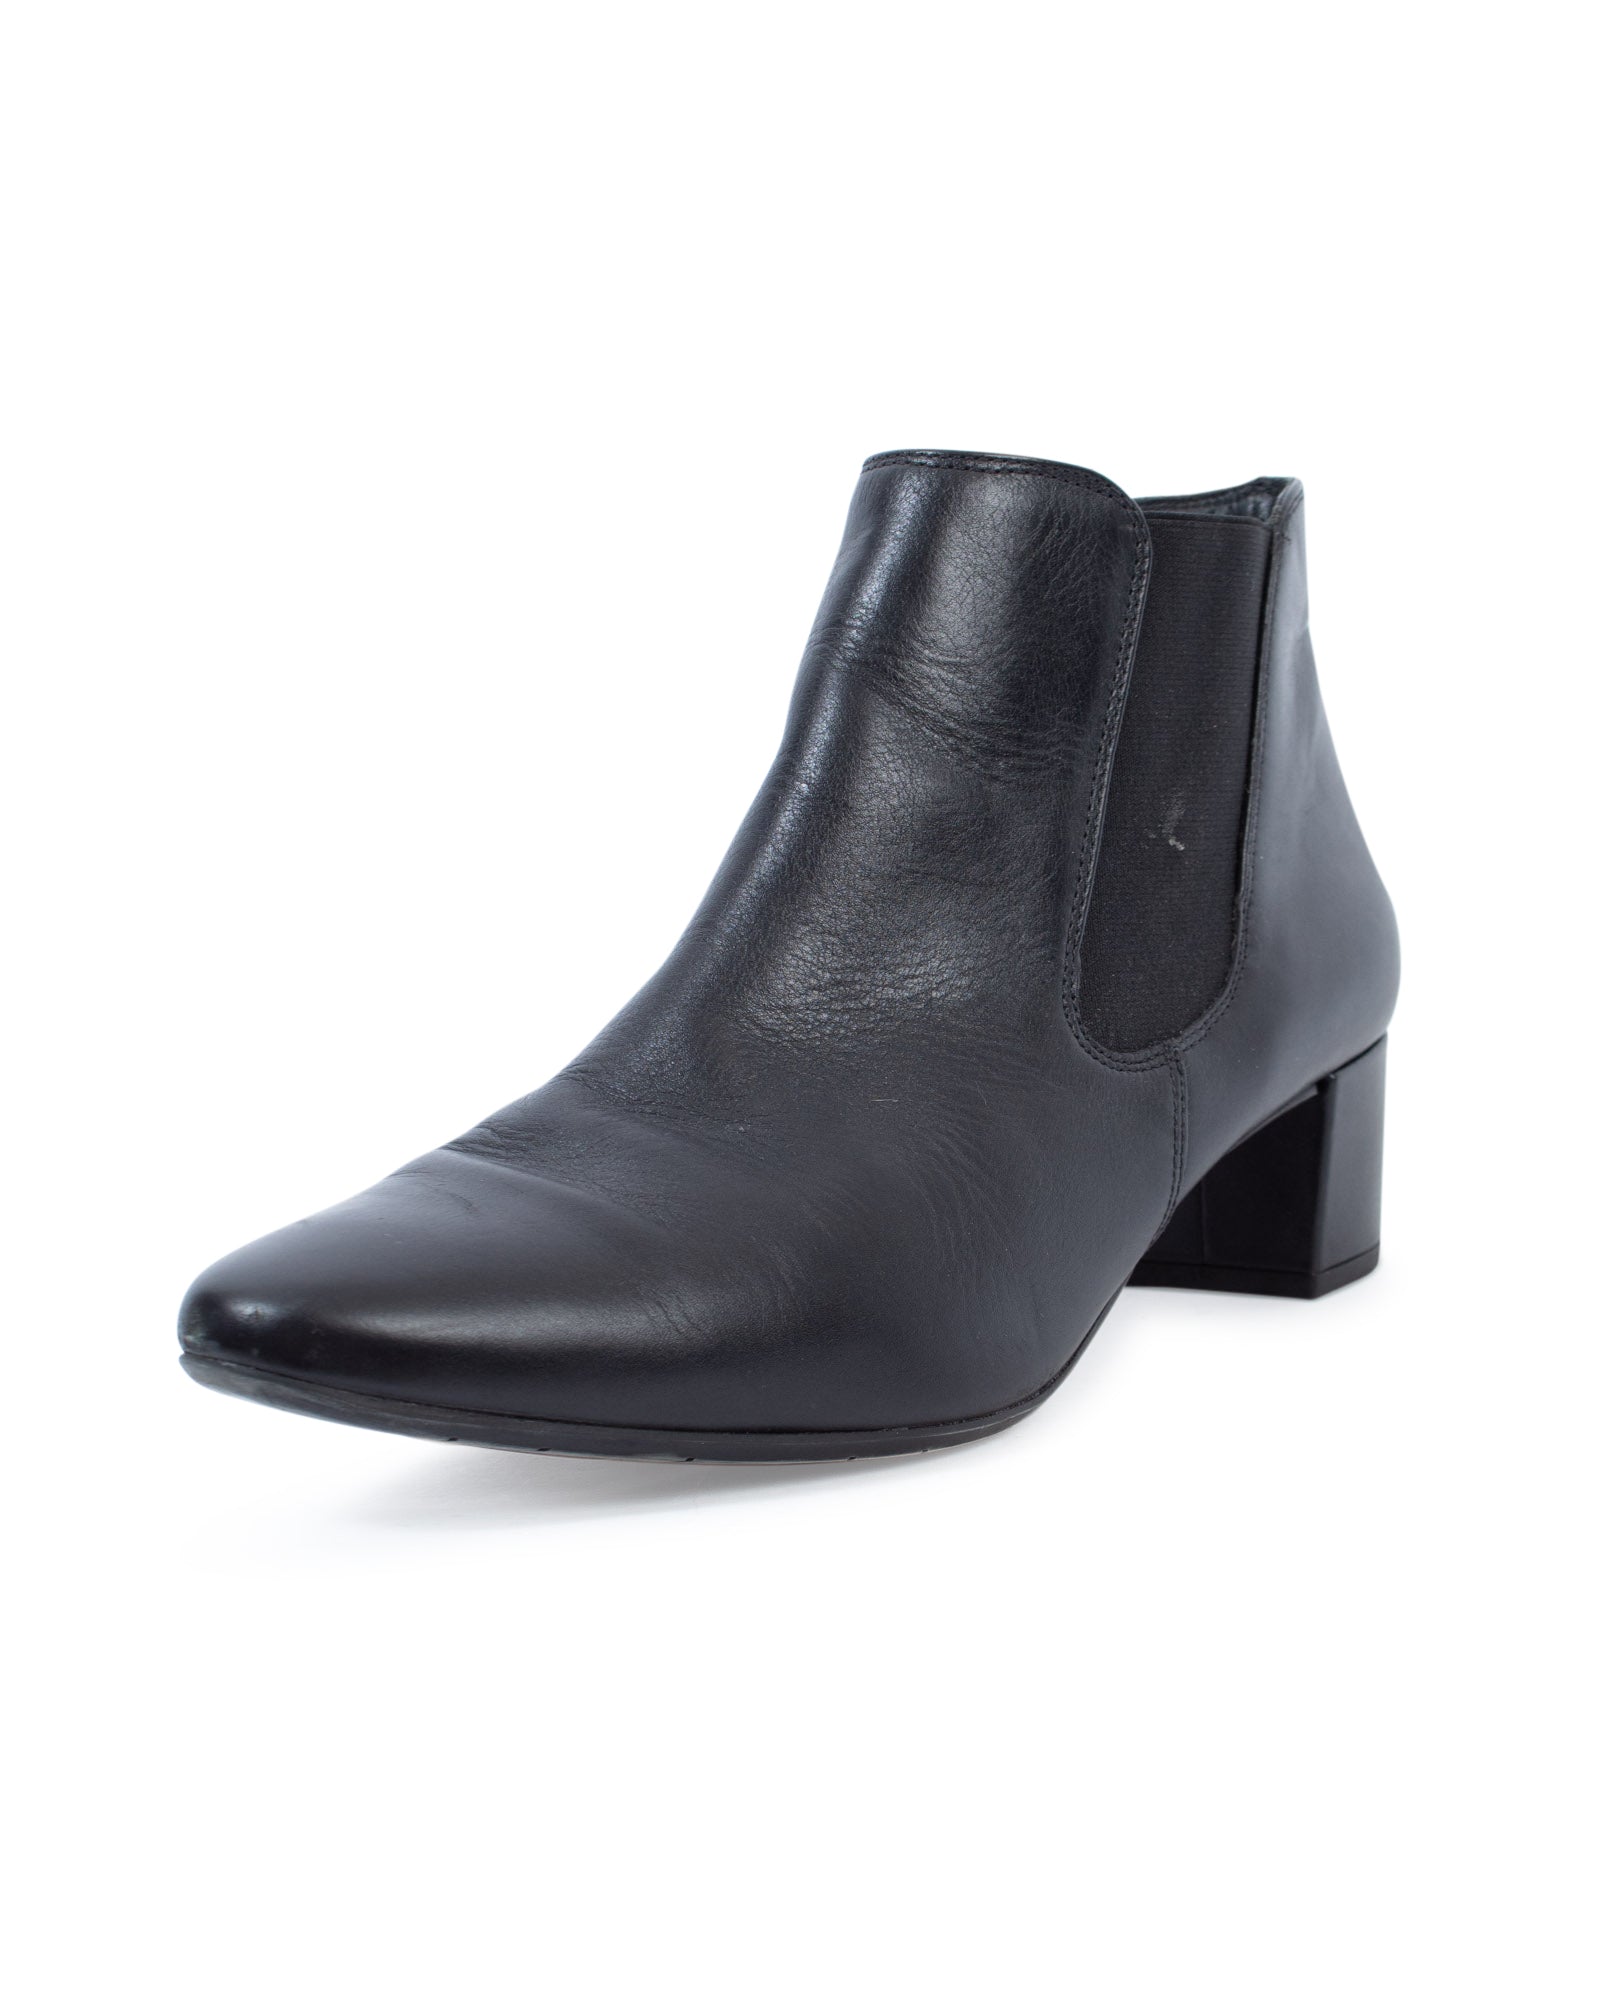 Trend galop Grens Mid Heel Ankle Boots - The Revury